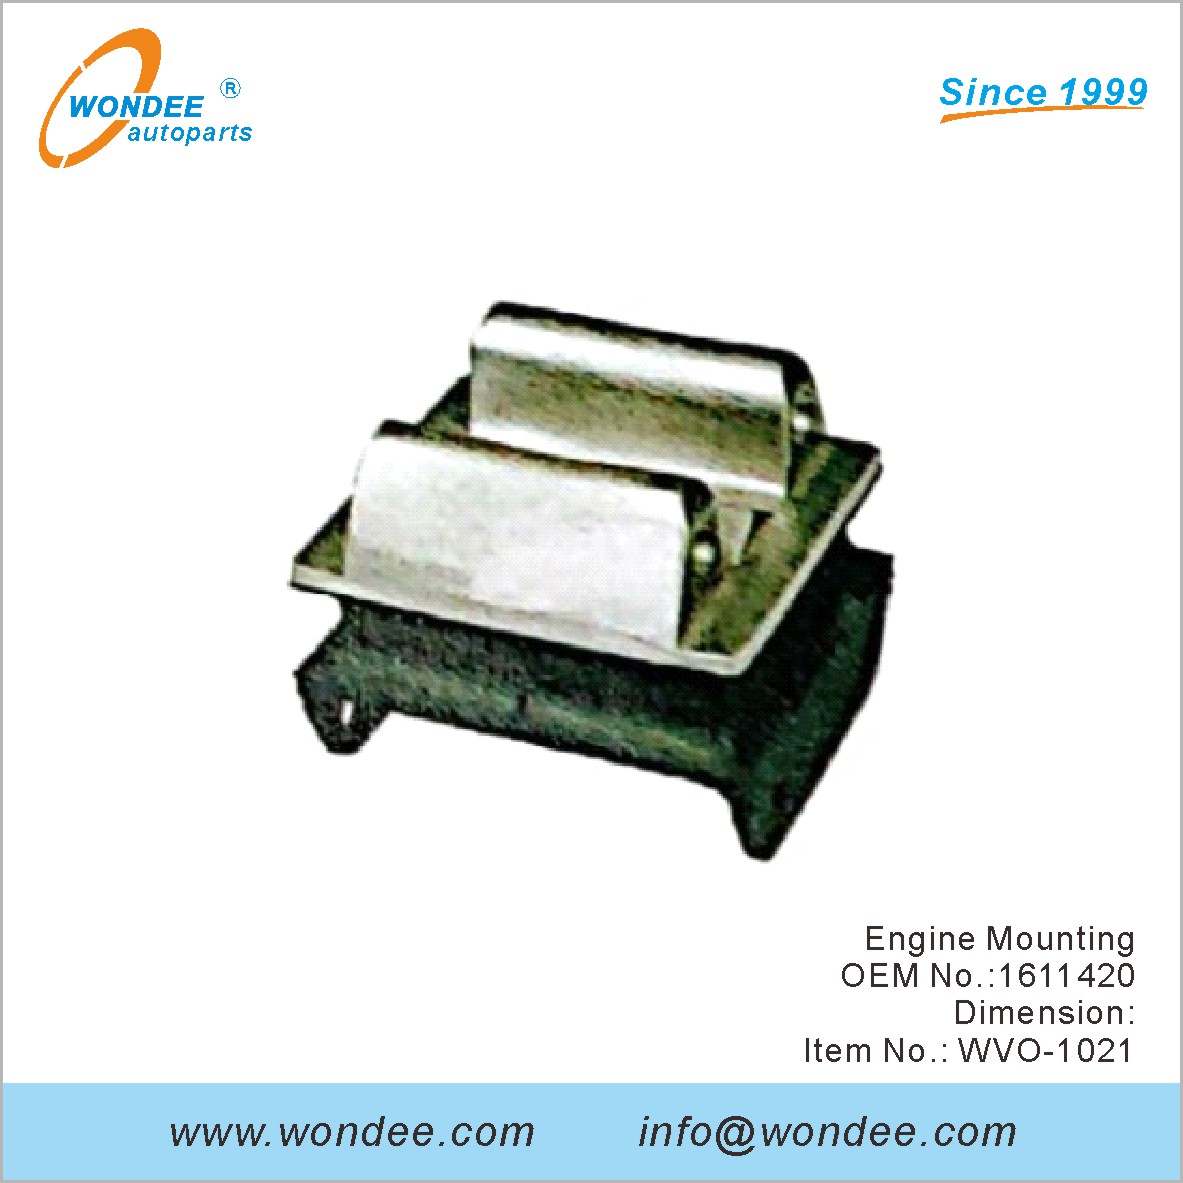 Engine Mounting OEM 1611420 for Volvo from WONDEE